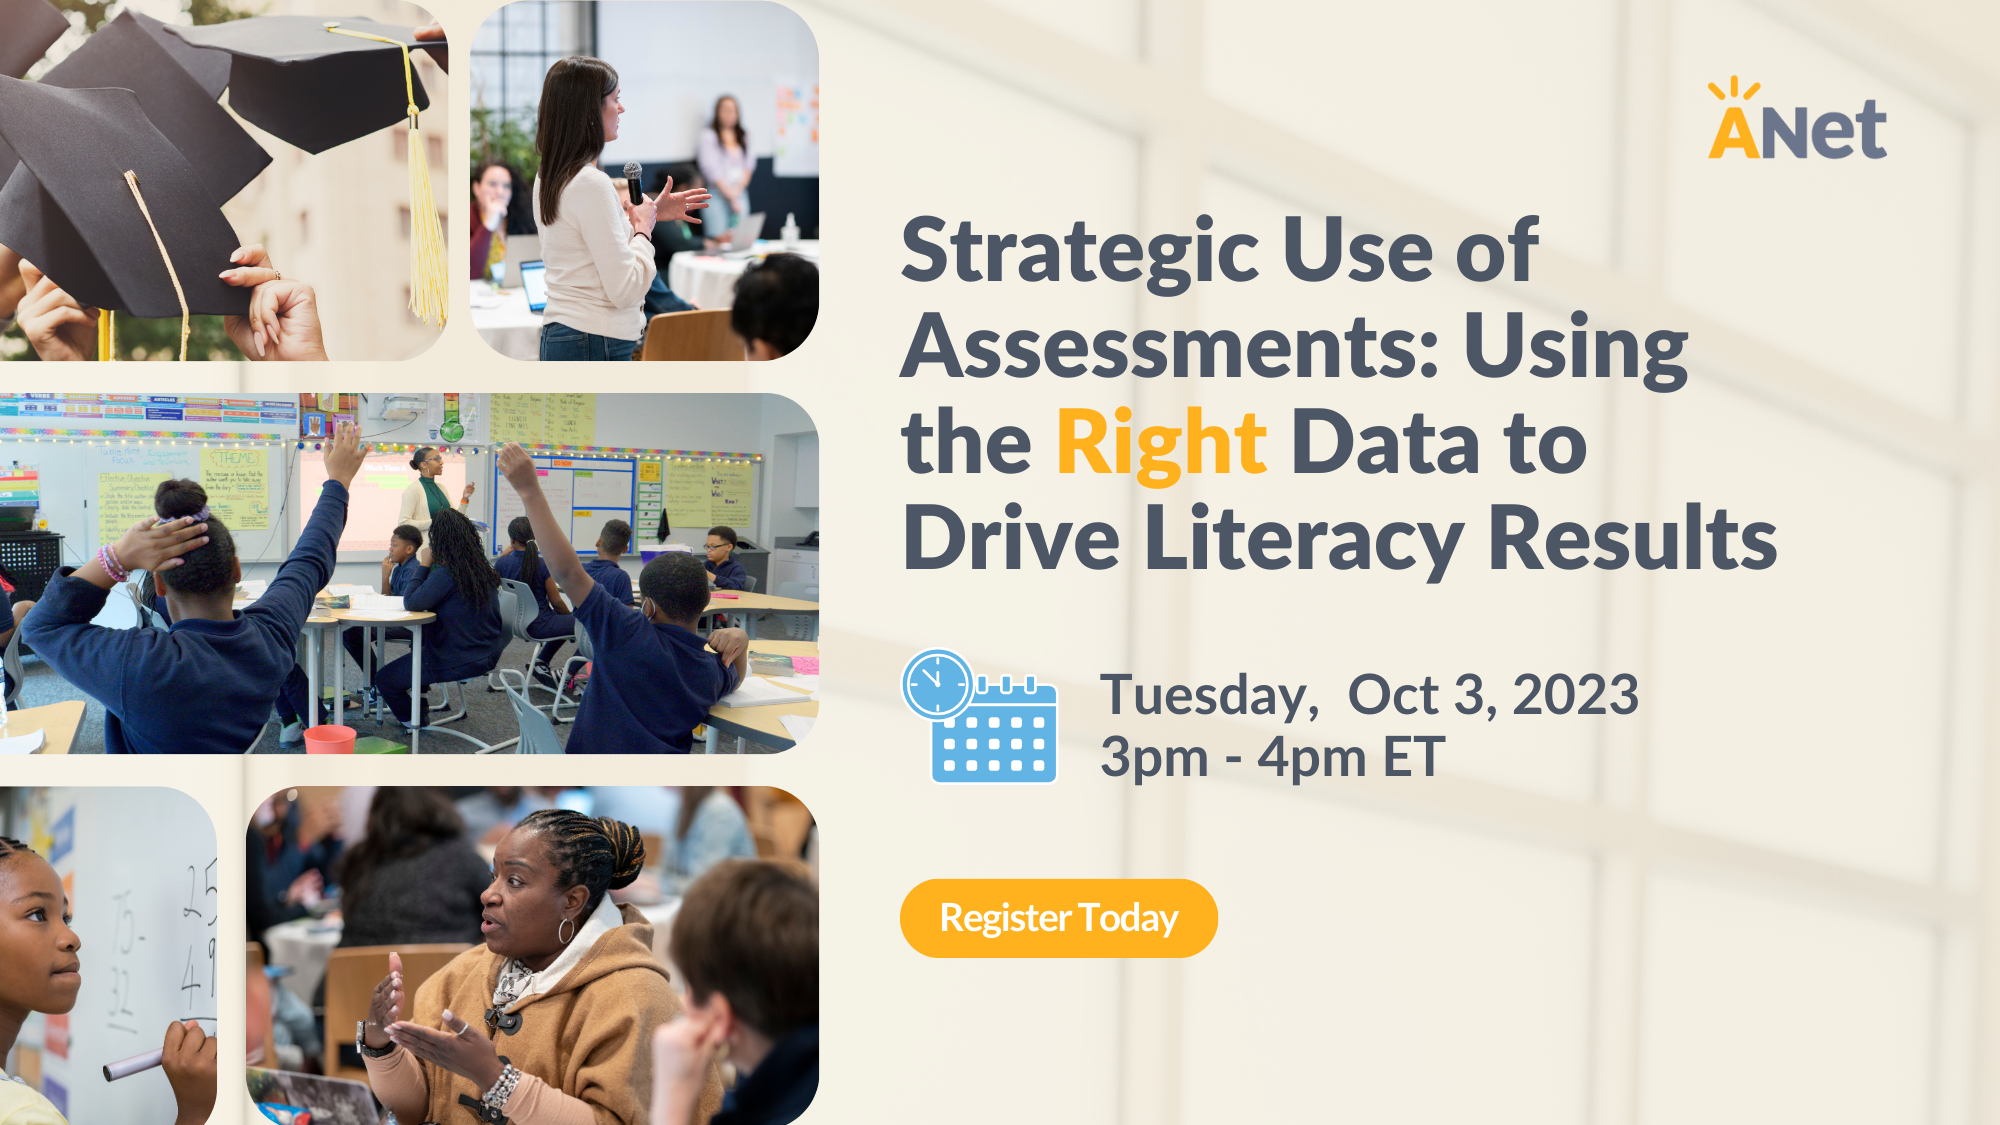 Strategic Use of Assessments: Using the Right Data to Drive Literacy Results